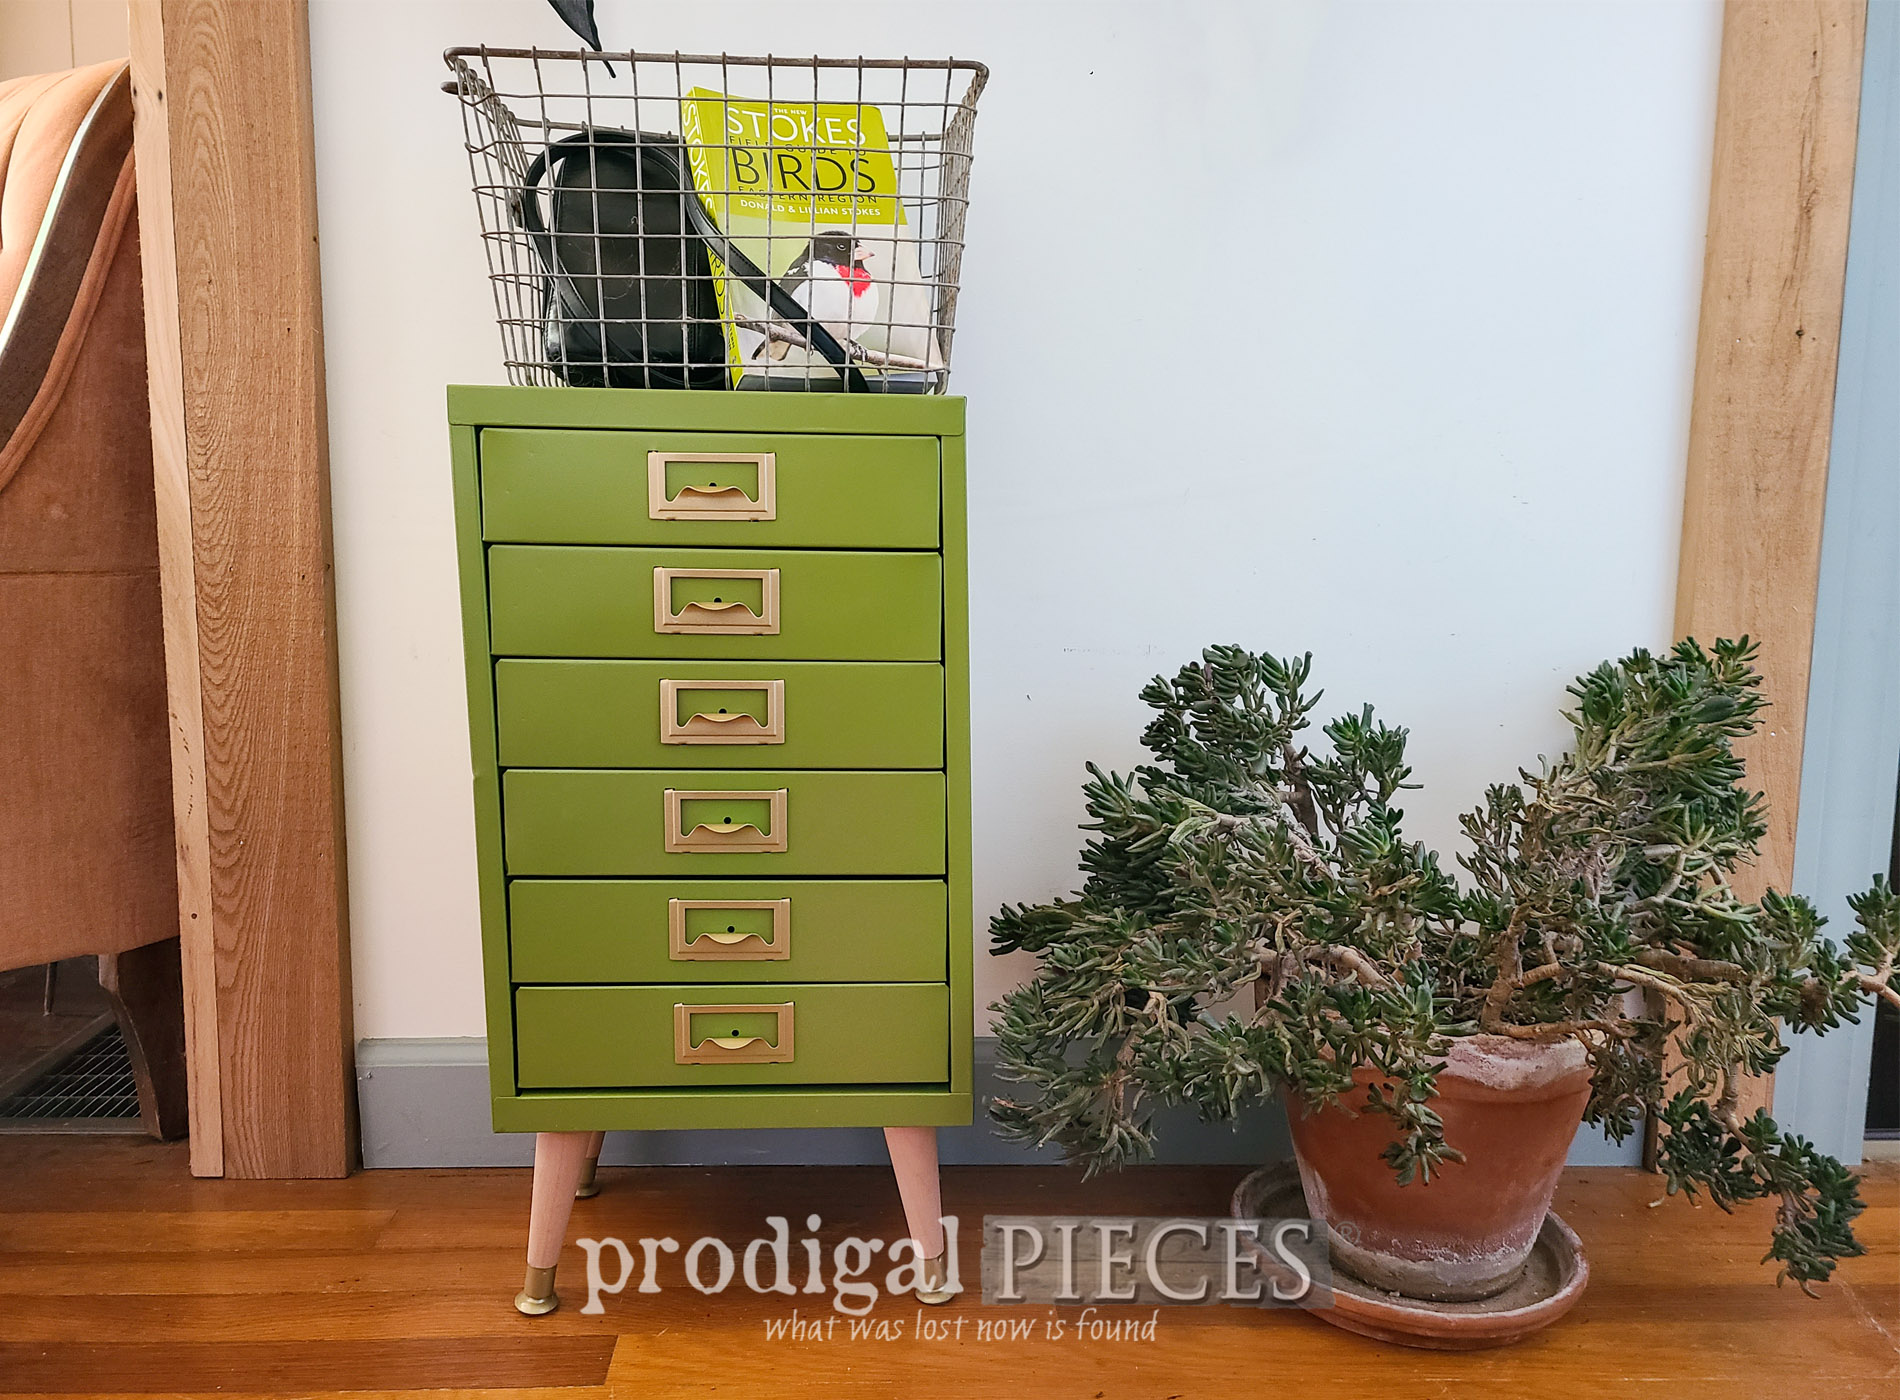 DIY Featured Vintage Filing Cabinet Makeover by Larissa of Prodigal Pieces | prodigalpieces.com #prodigalpieces #diy #vintage #furniture